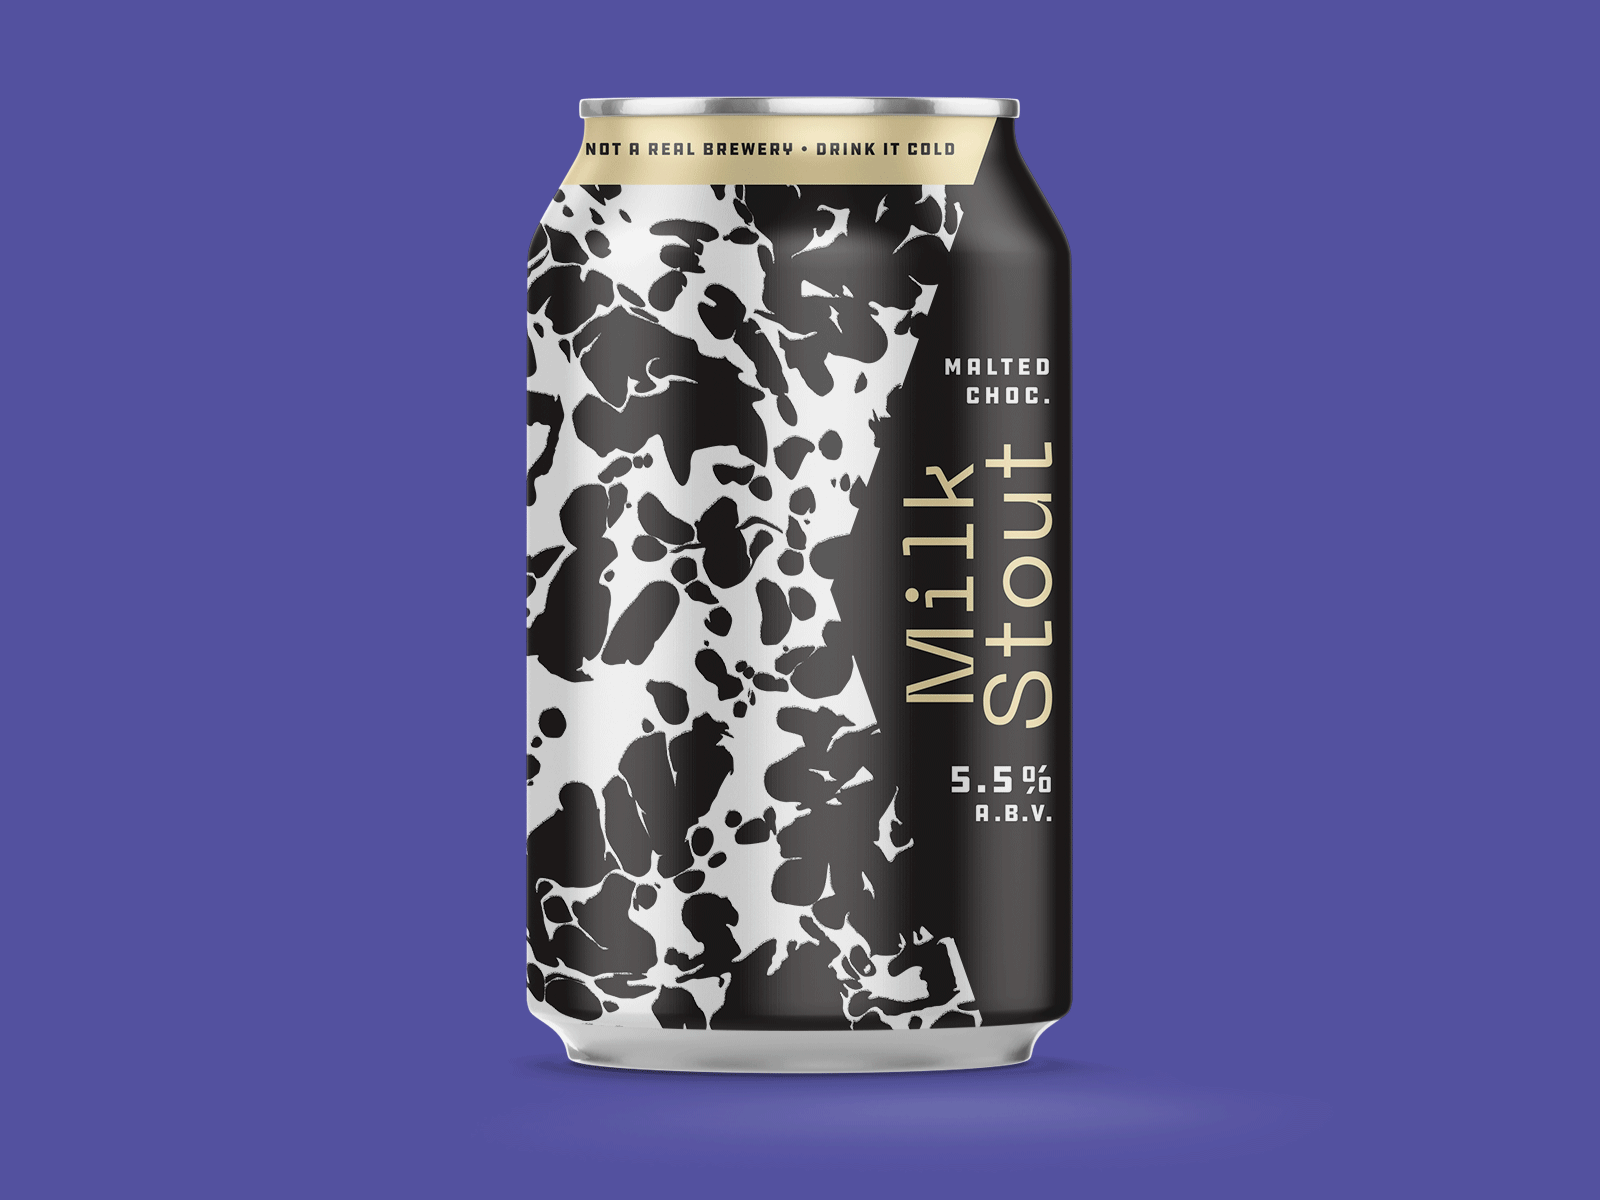 #notarealbrewery 6 pack beer branding brewery craft beer design milk stout packaging stout typography